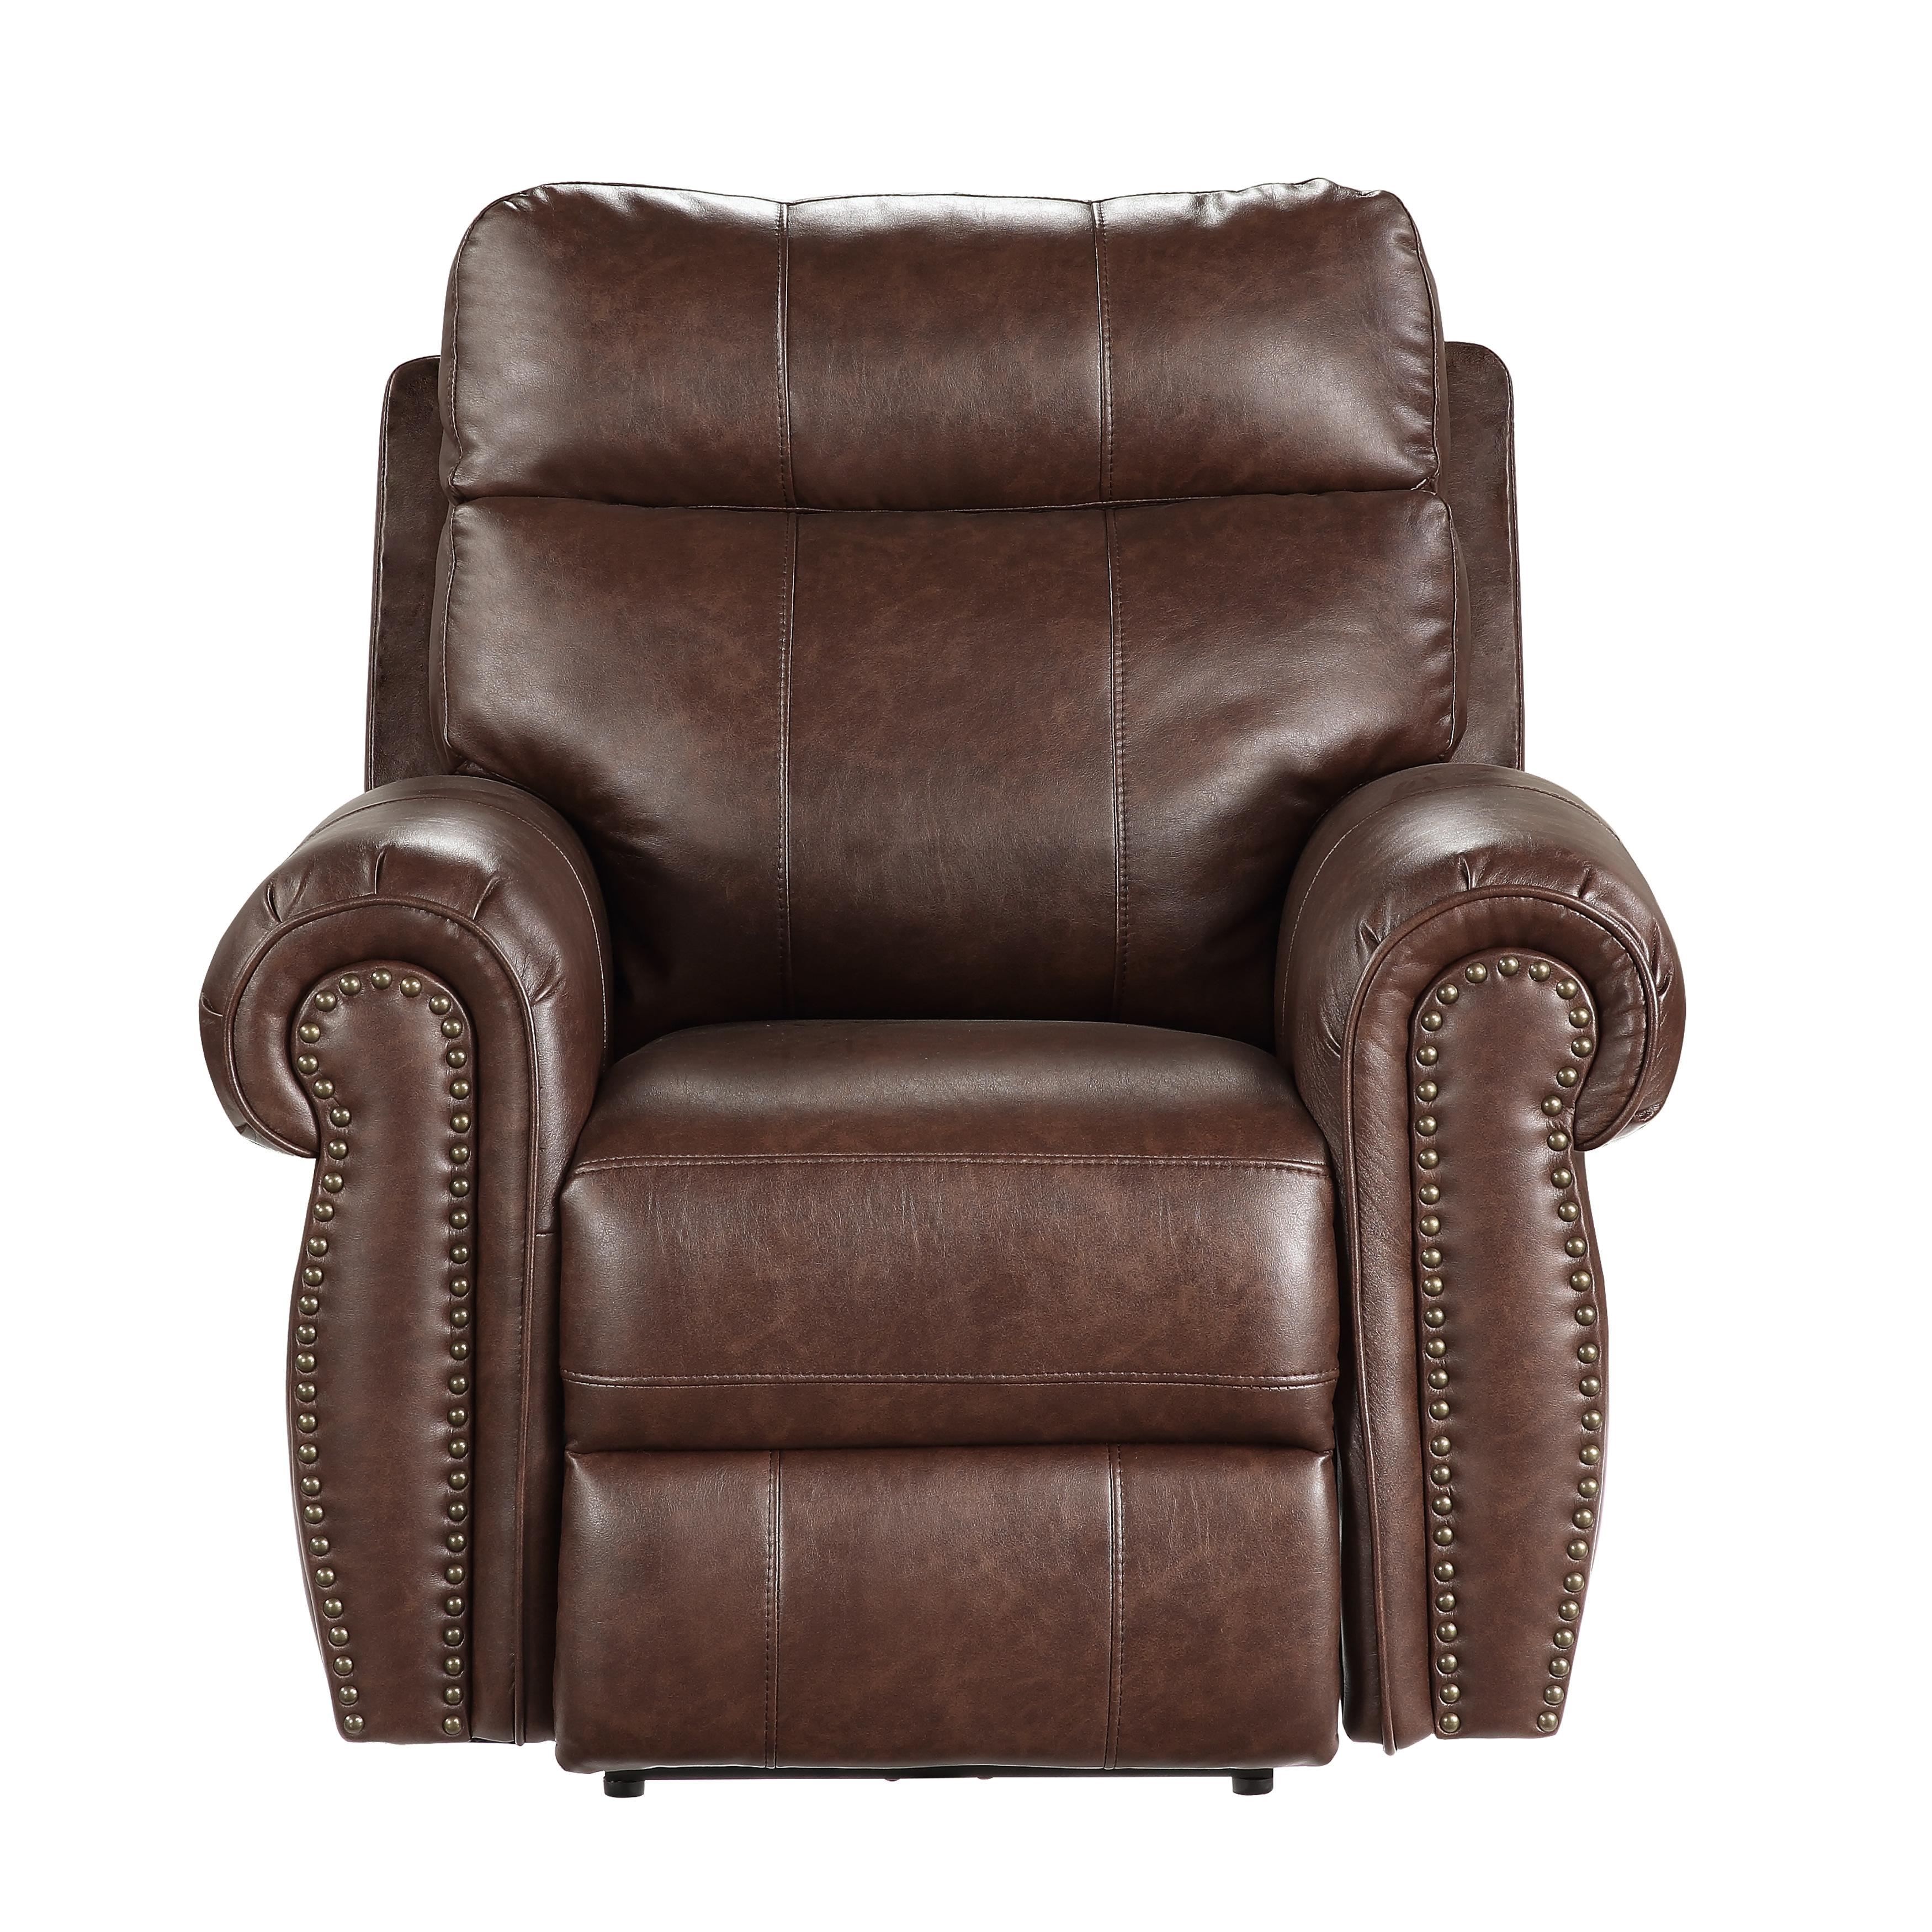 Transitional Power Reclining Chair 9488BR-1PW Granville 9488BR-1PW in Brown Microfiber